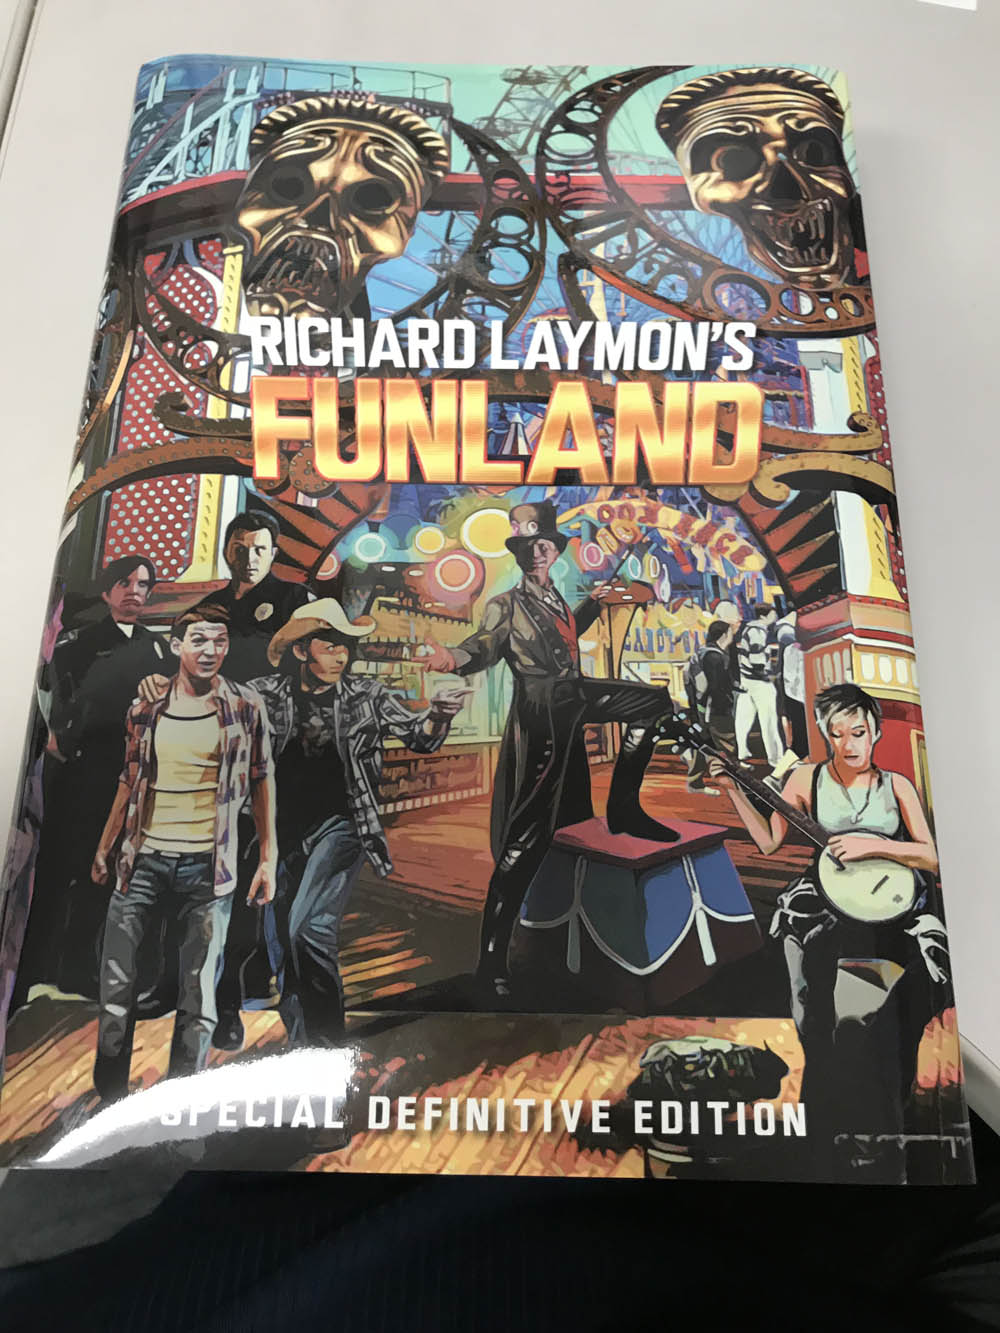 UPDATE: Richard Laymon's Funland Special Definitive Edition